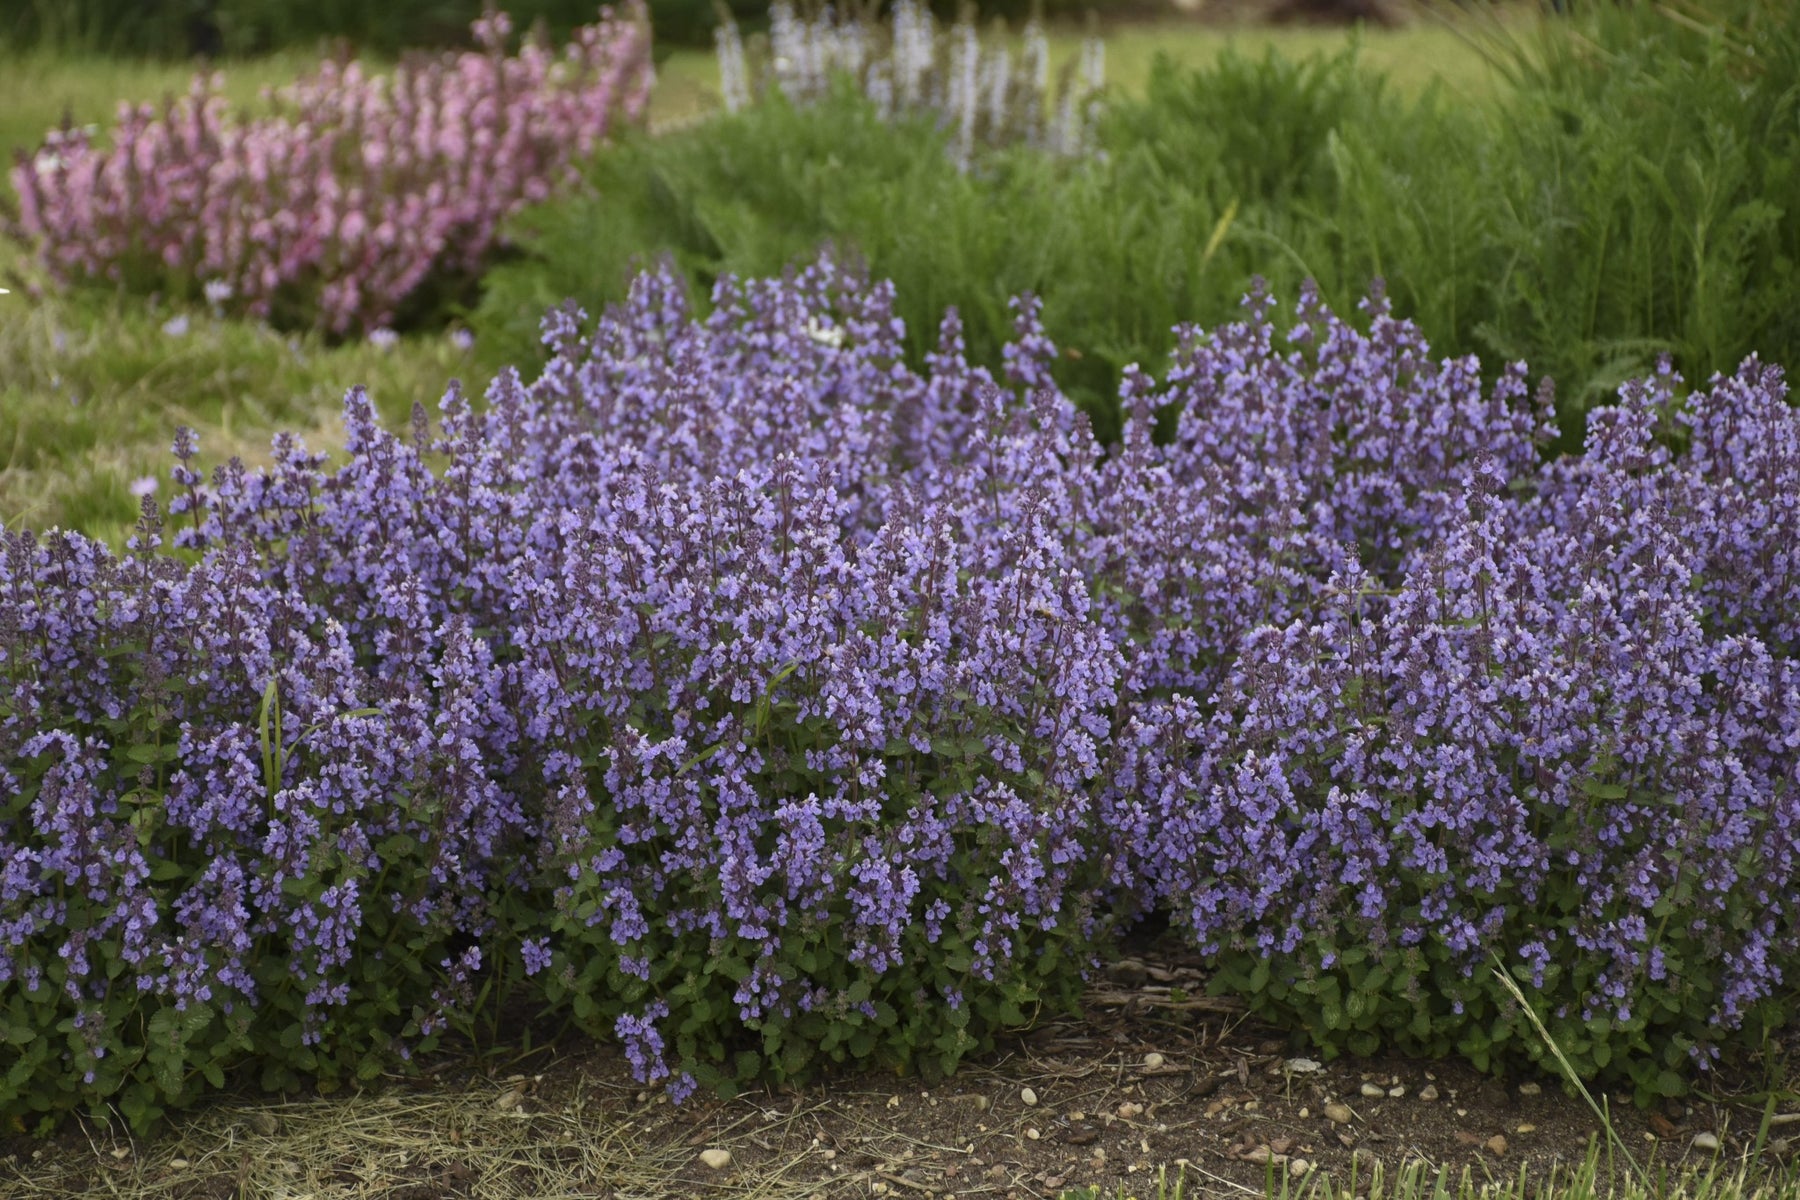 Nepeta 'Cat's Pajamas' (Catmint) // BEST,🌞 Earlier, Free